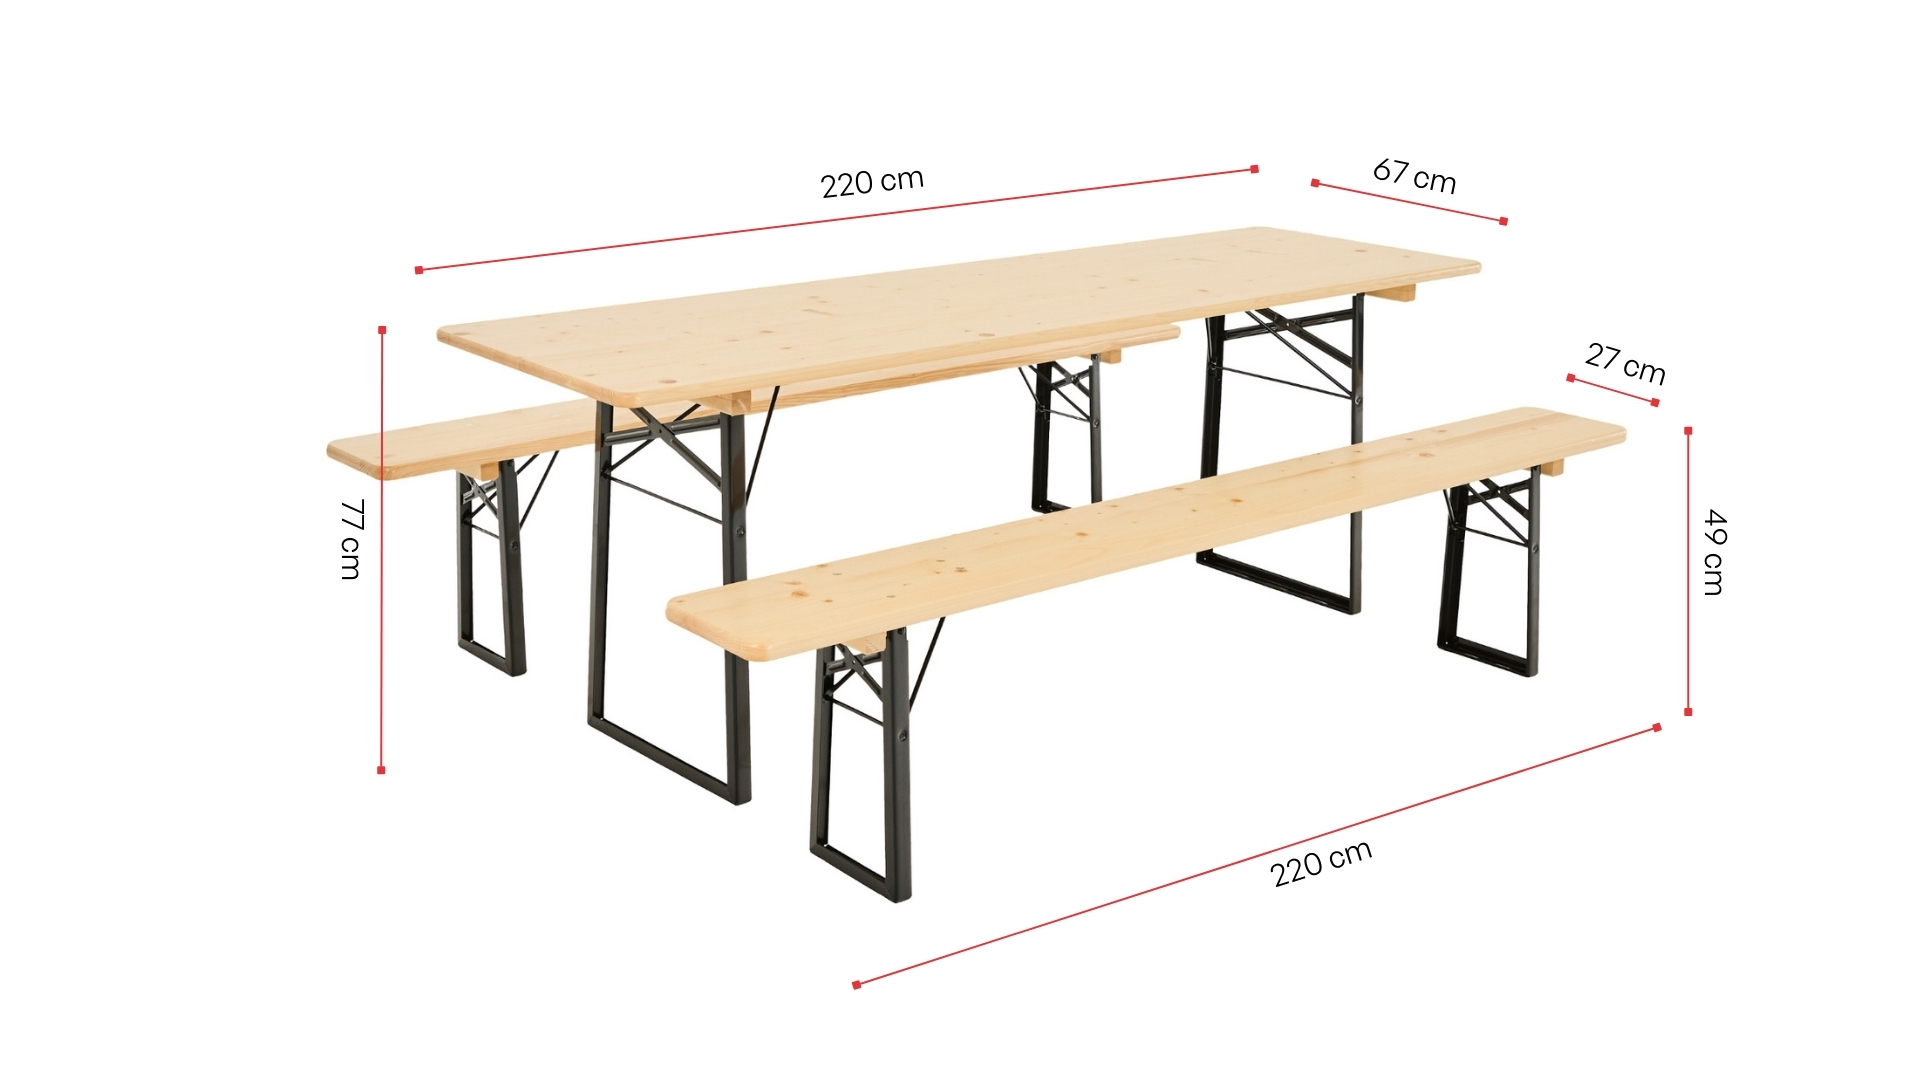 A classic beer garden table sets is shown with its dimensions in nature.